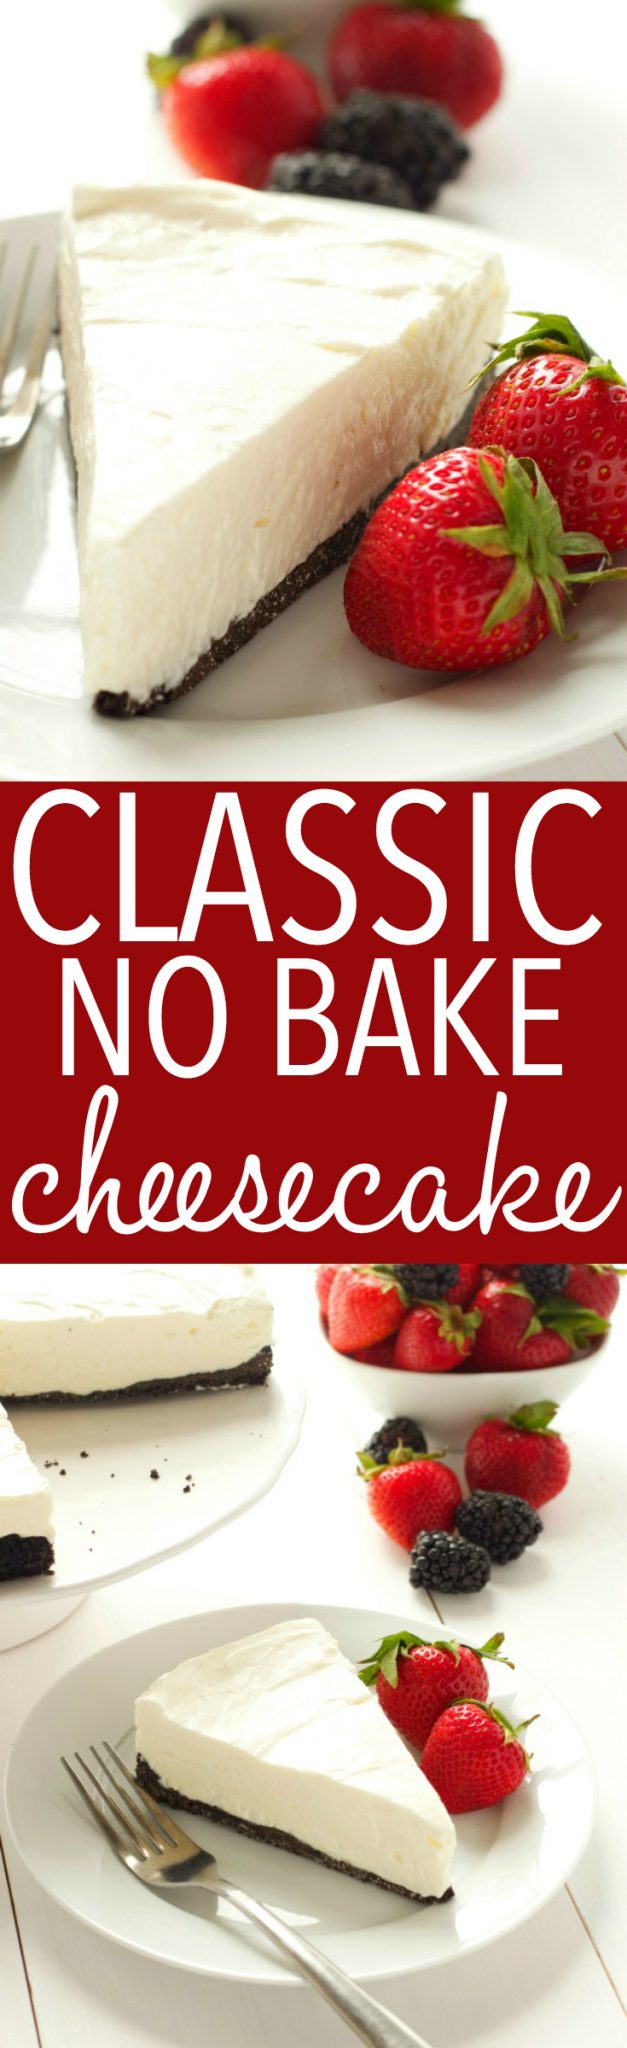 This Classic No Bake Cheesecake is so creamy and delicious and it's made with only 3 ingredients!! It's the perfect easy dessert that you don't have to bake! Serve it with fresh berries for an easy summer treat or add whatever toppings you like and enjoy it any time of the year! Recipe from thebusybaker.ca! #summerdessert #bestevernobakecheesecake via @busybakerblog